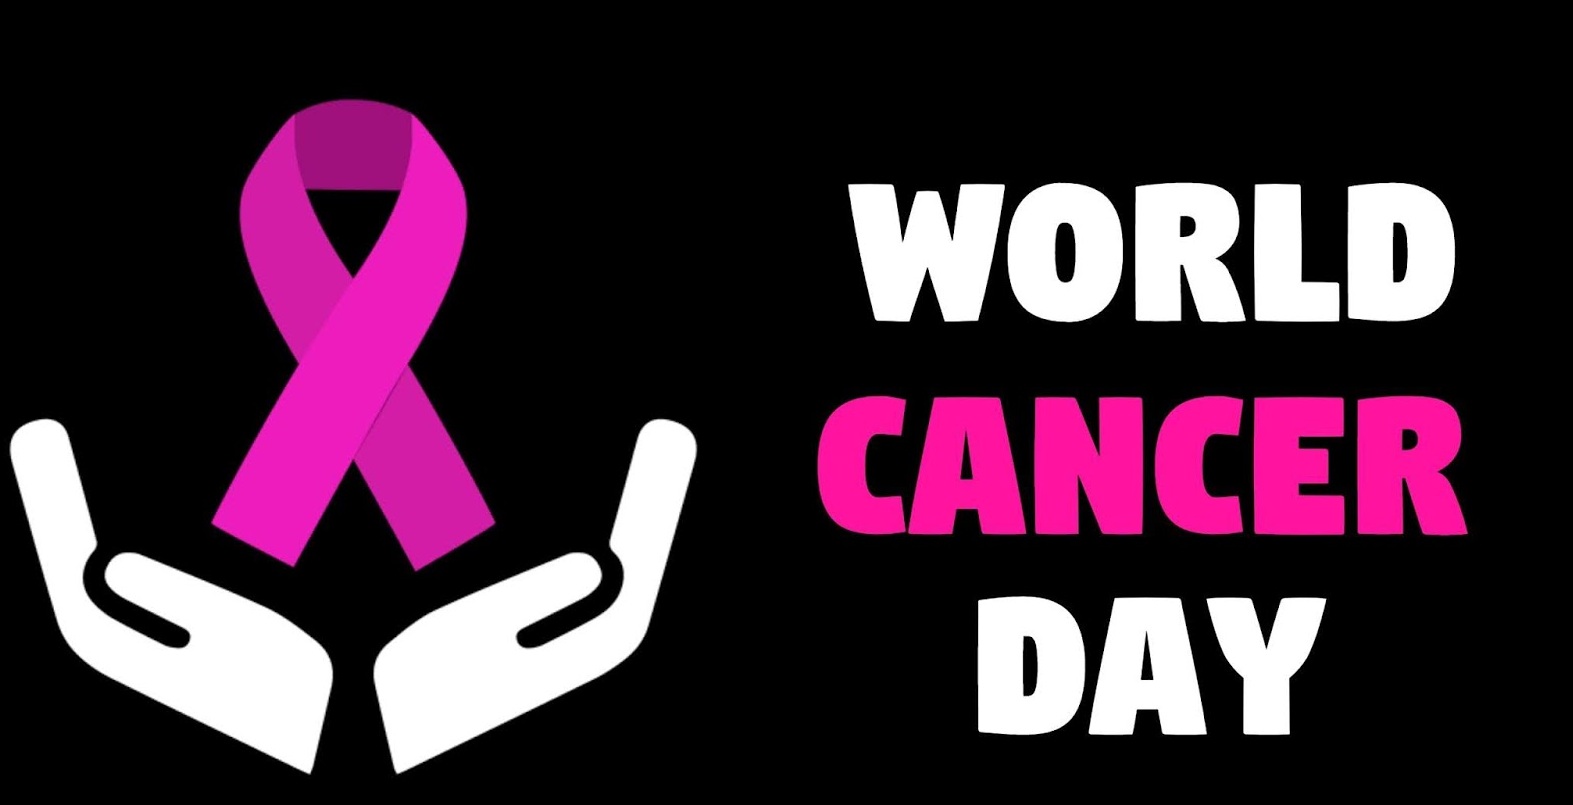 World Cancer Day 2021: Know the history, significance and theme of this day